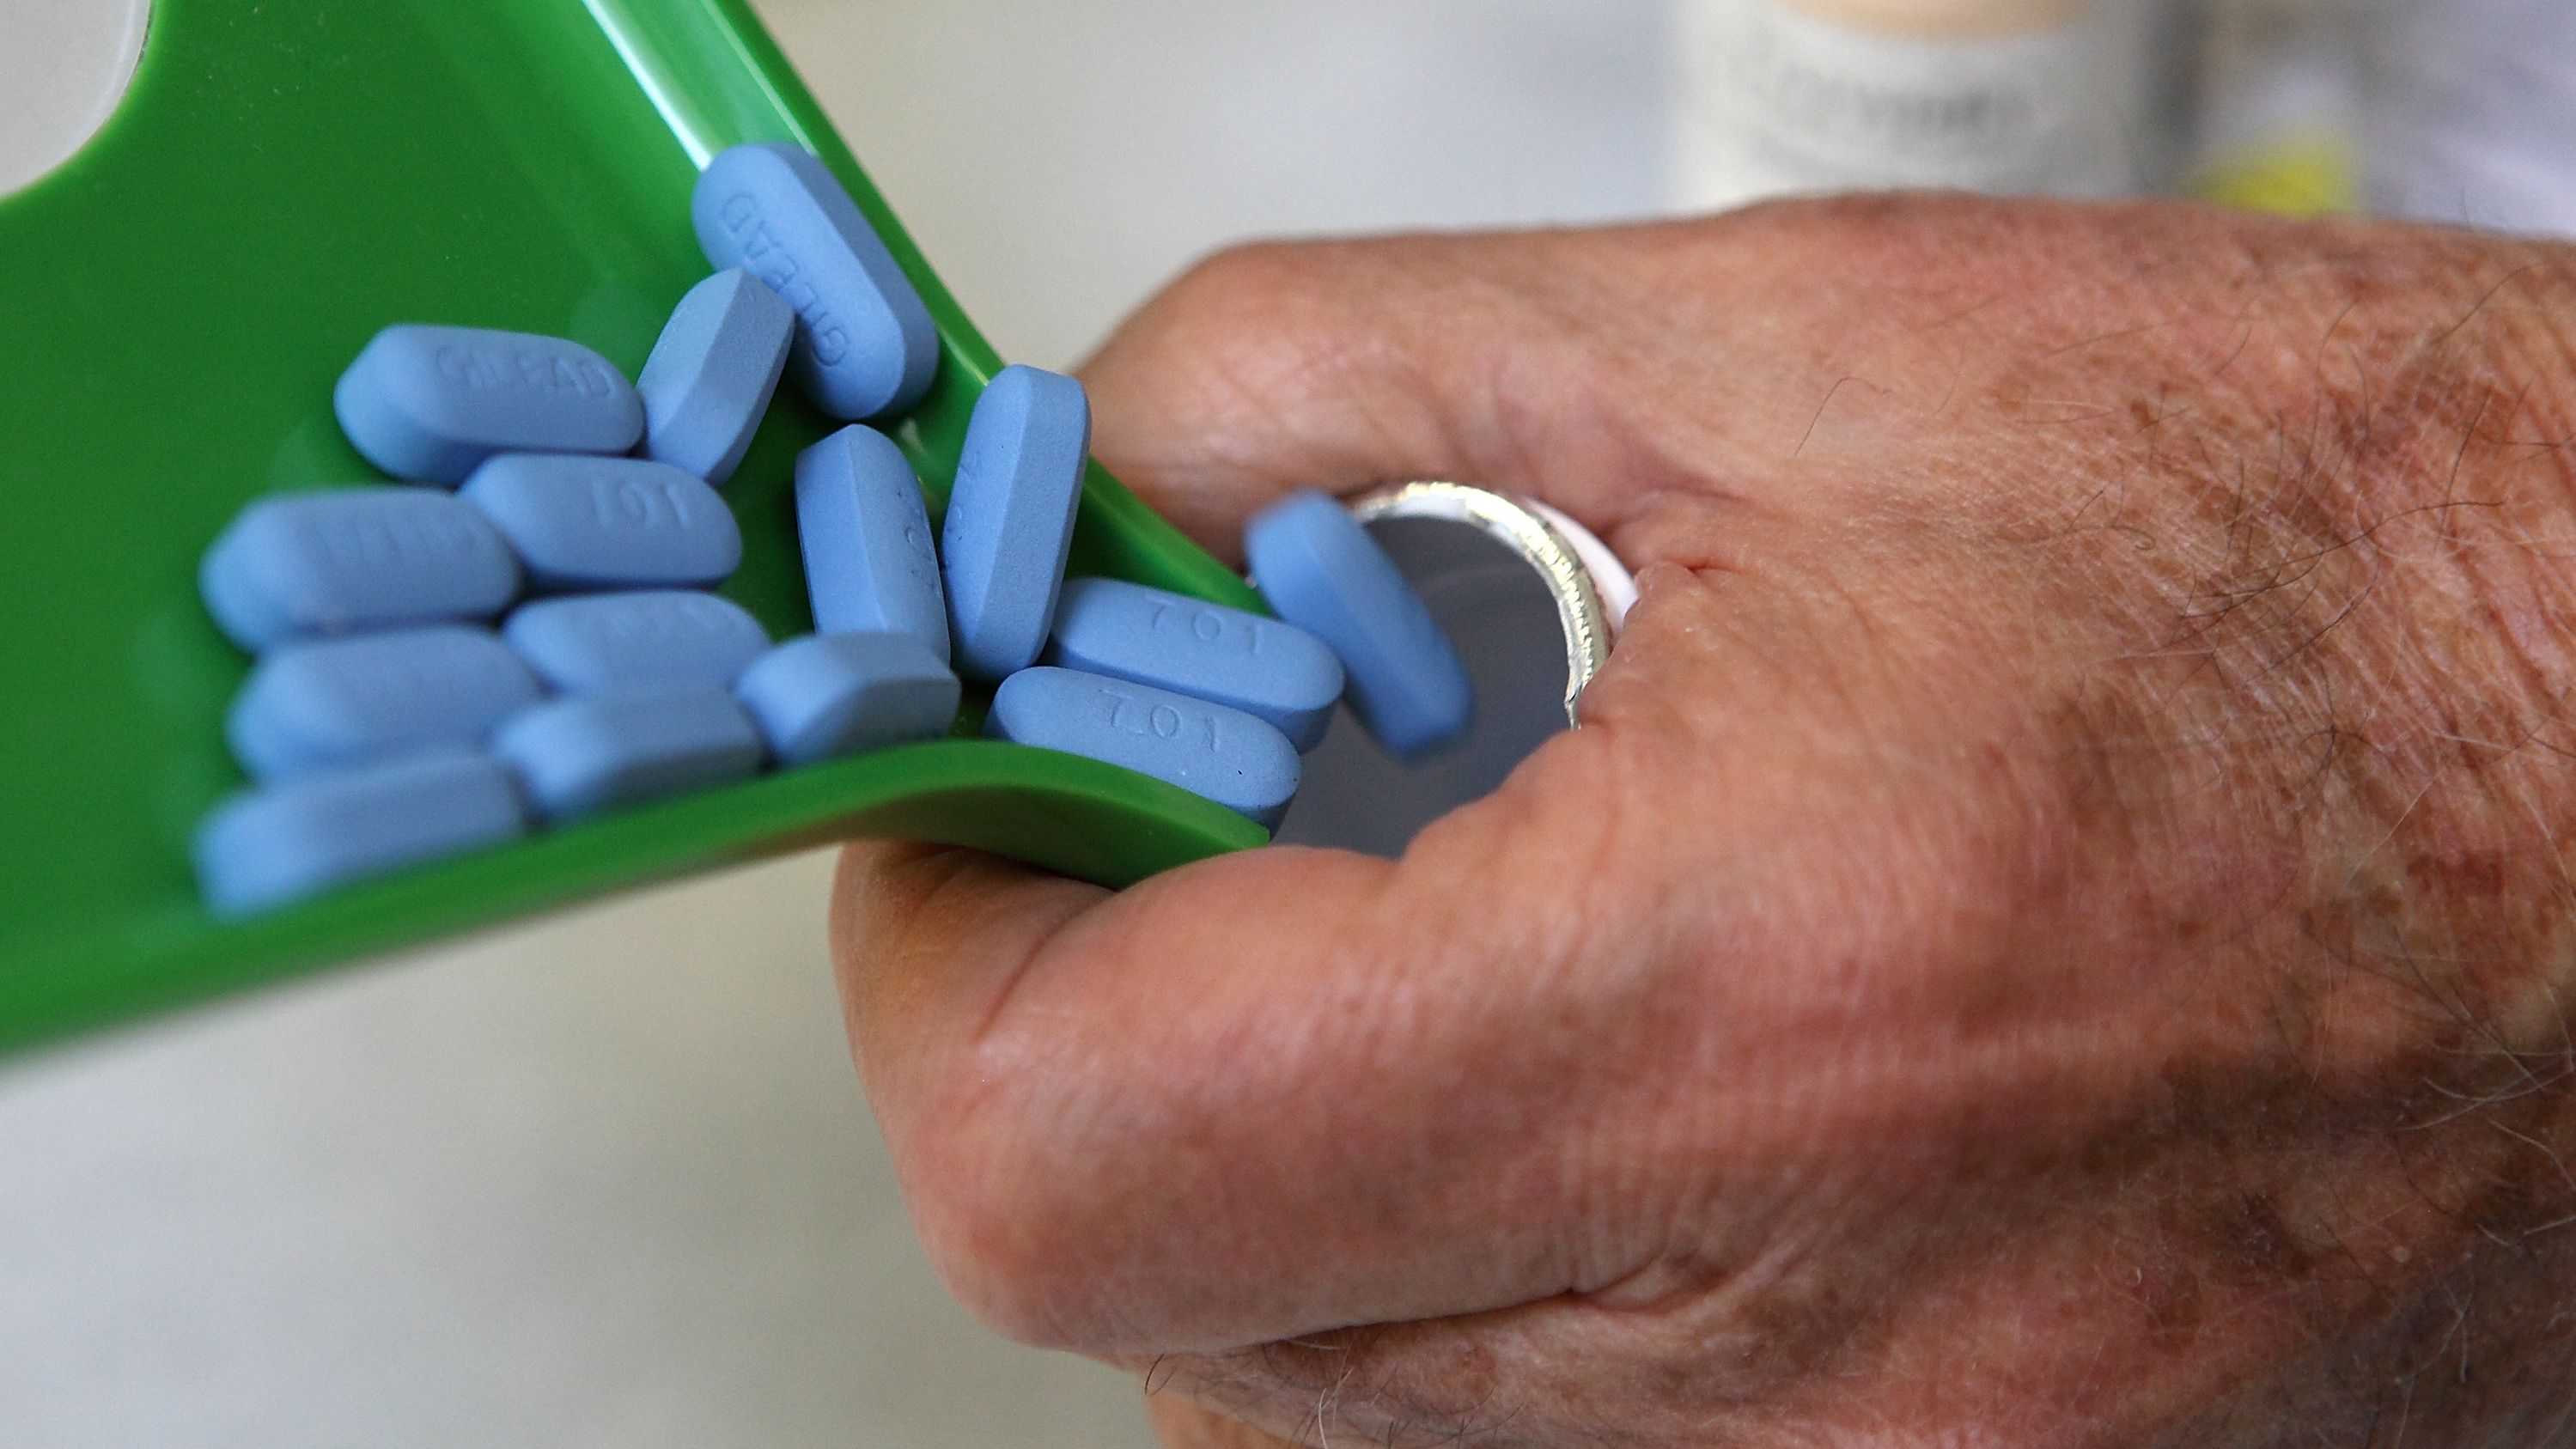  Antiretroviral drugs like Truvada have helped control the AIDS epidemic. 